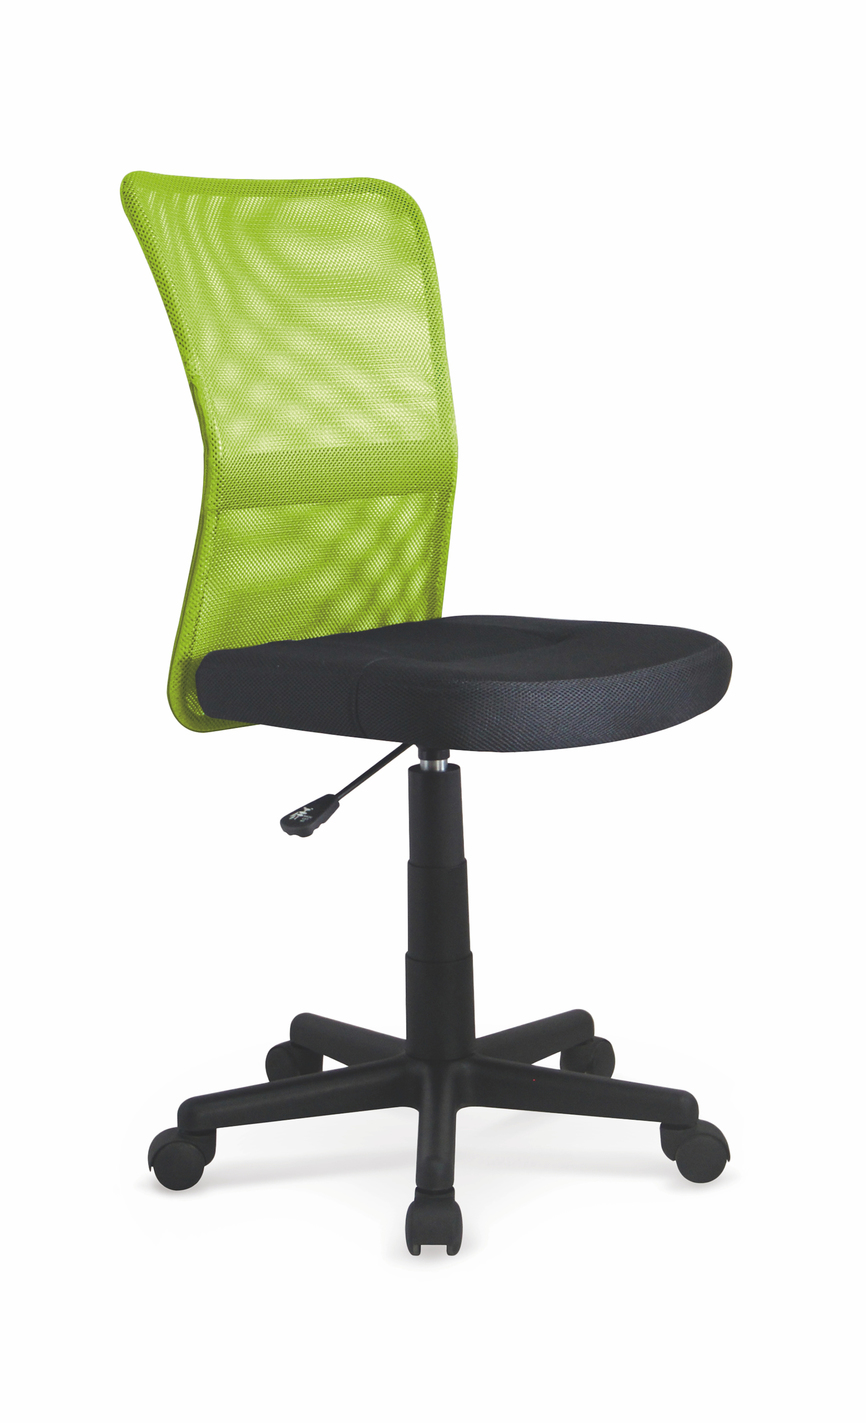 DINGO chair color: lime green